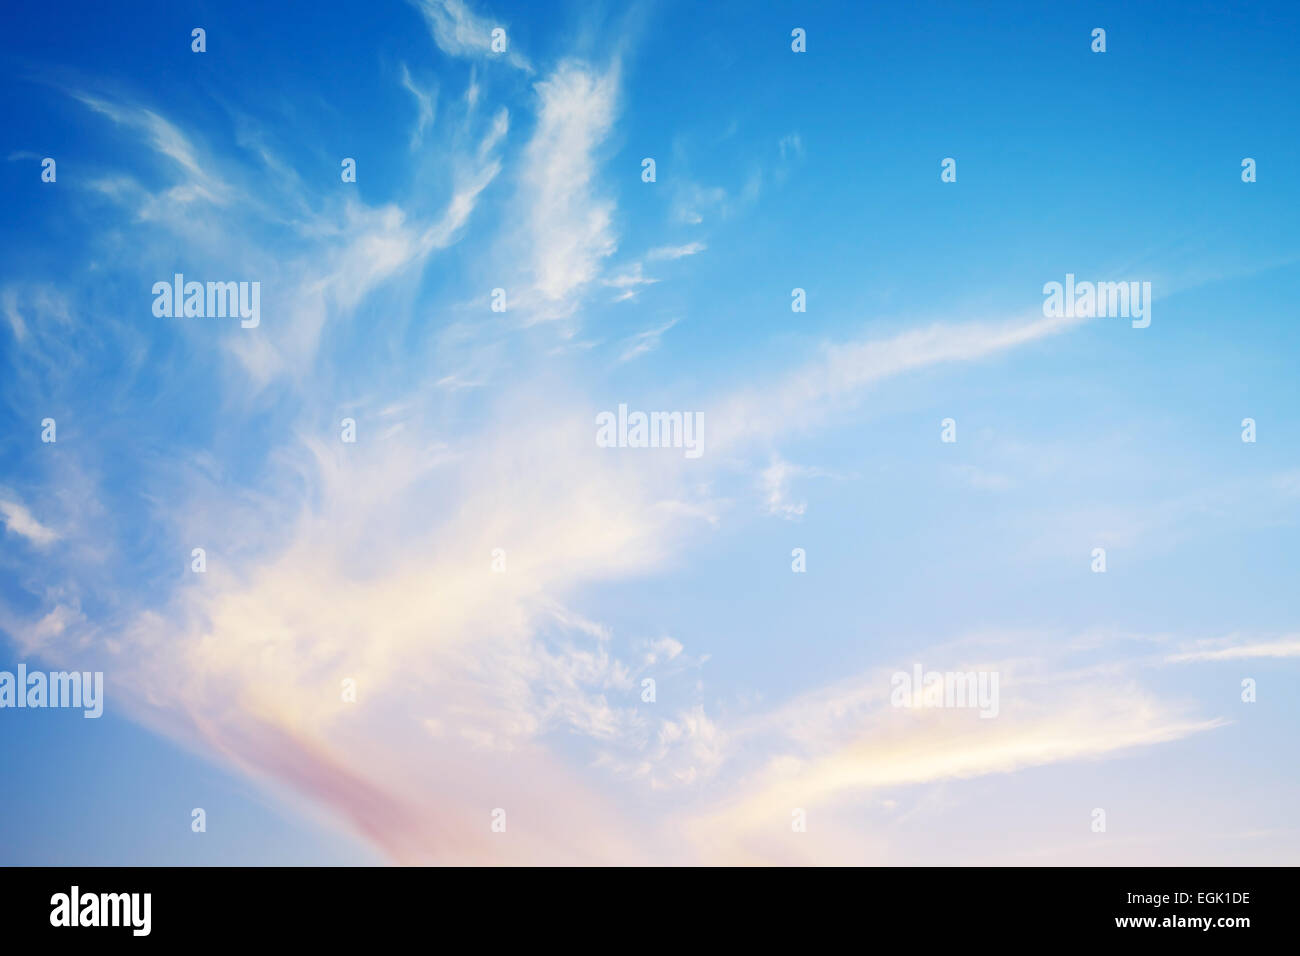 Natural bright cloudy evening sky background photo texture Stock Photo